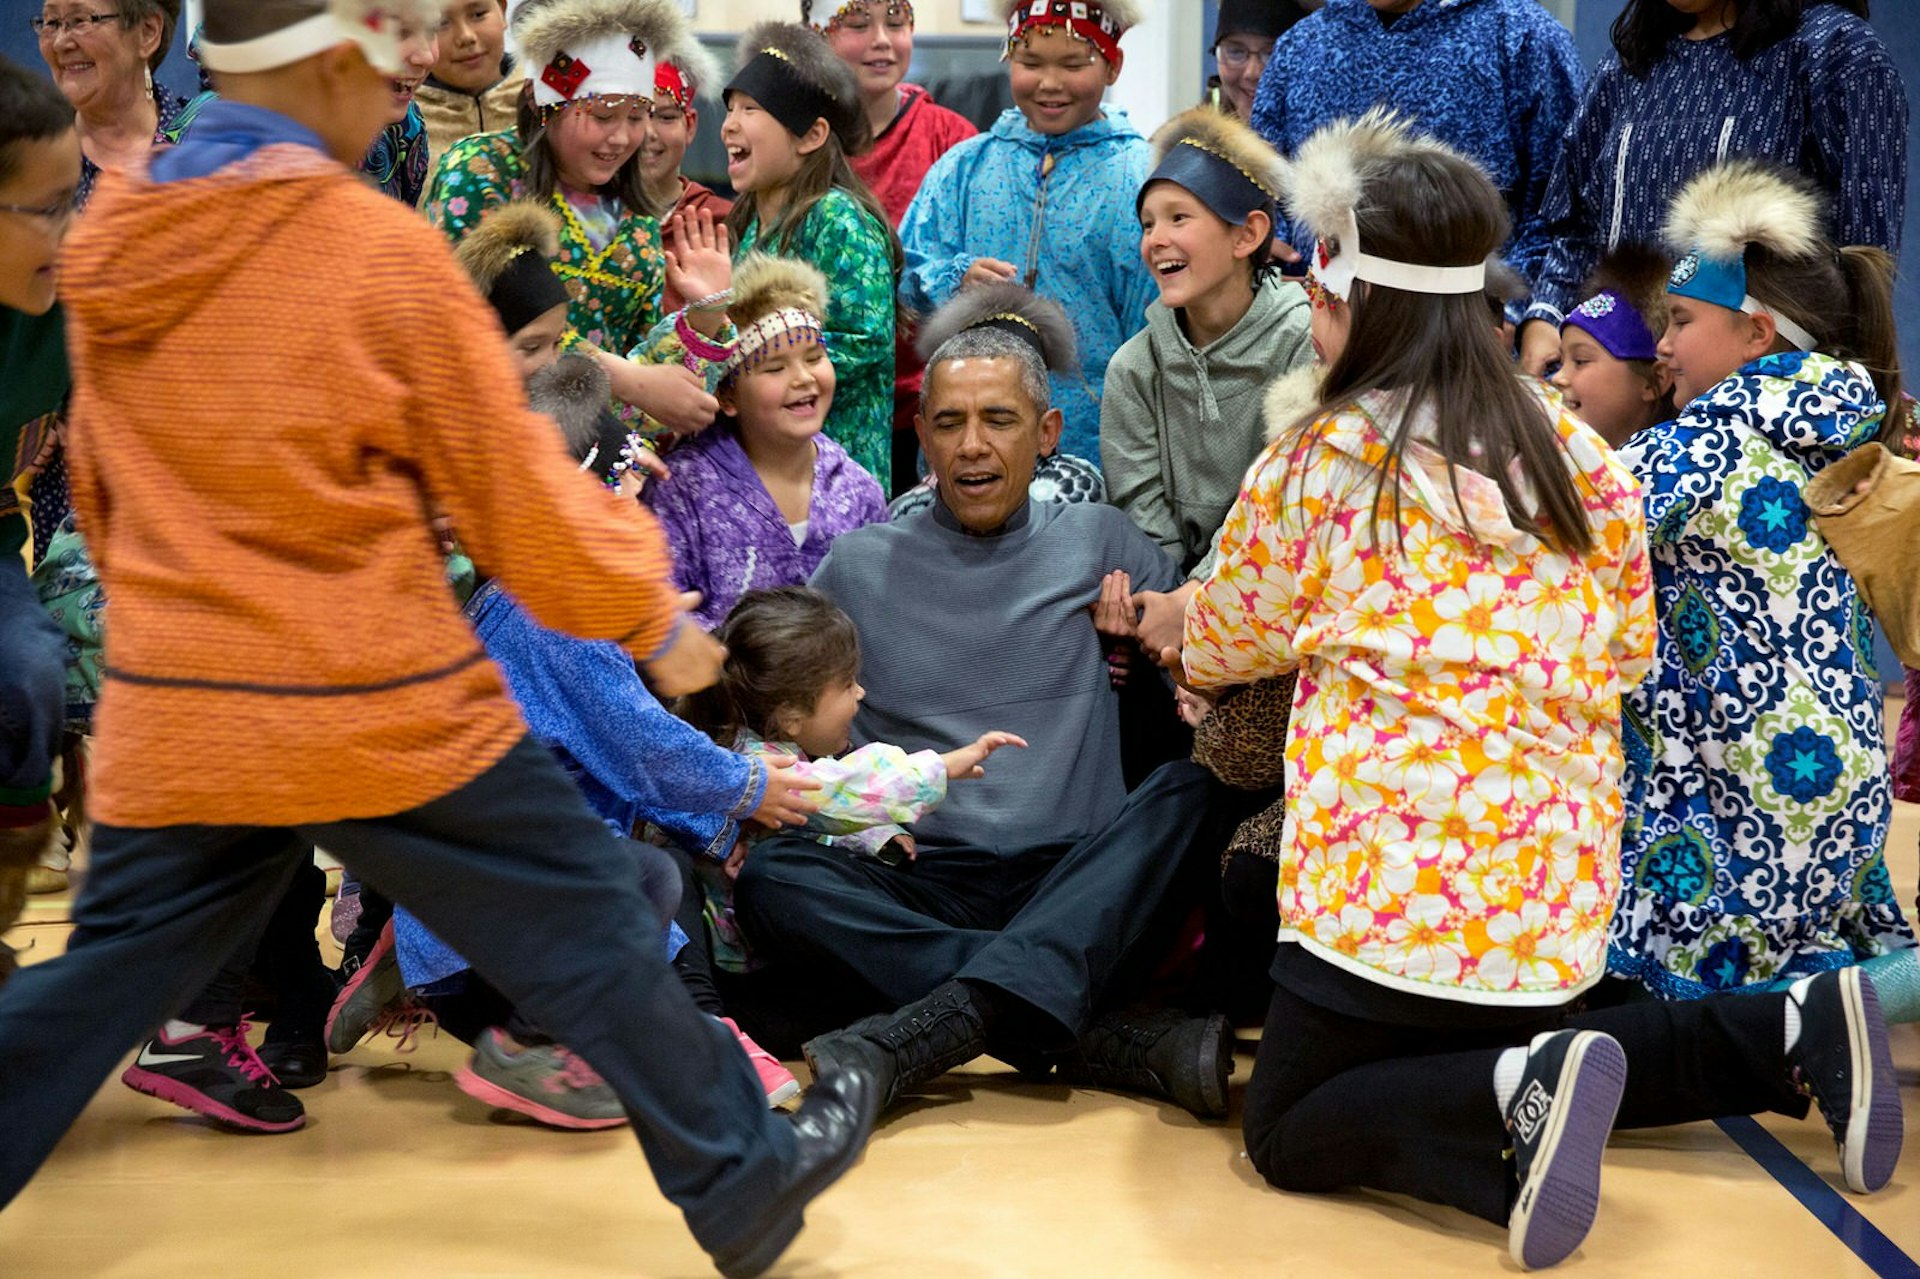 The president being helped to his feet after a group photo with the performers at Dillingham Middle School, Alaska © Pete Souza / Official White House Photo